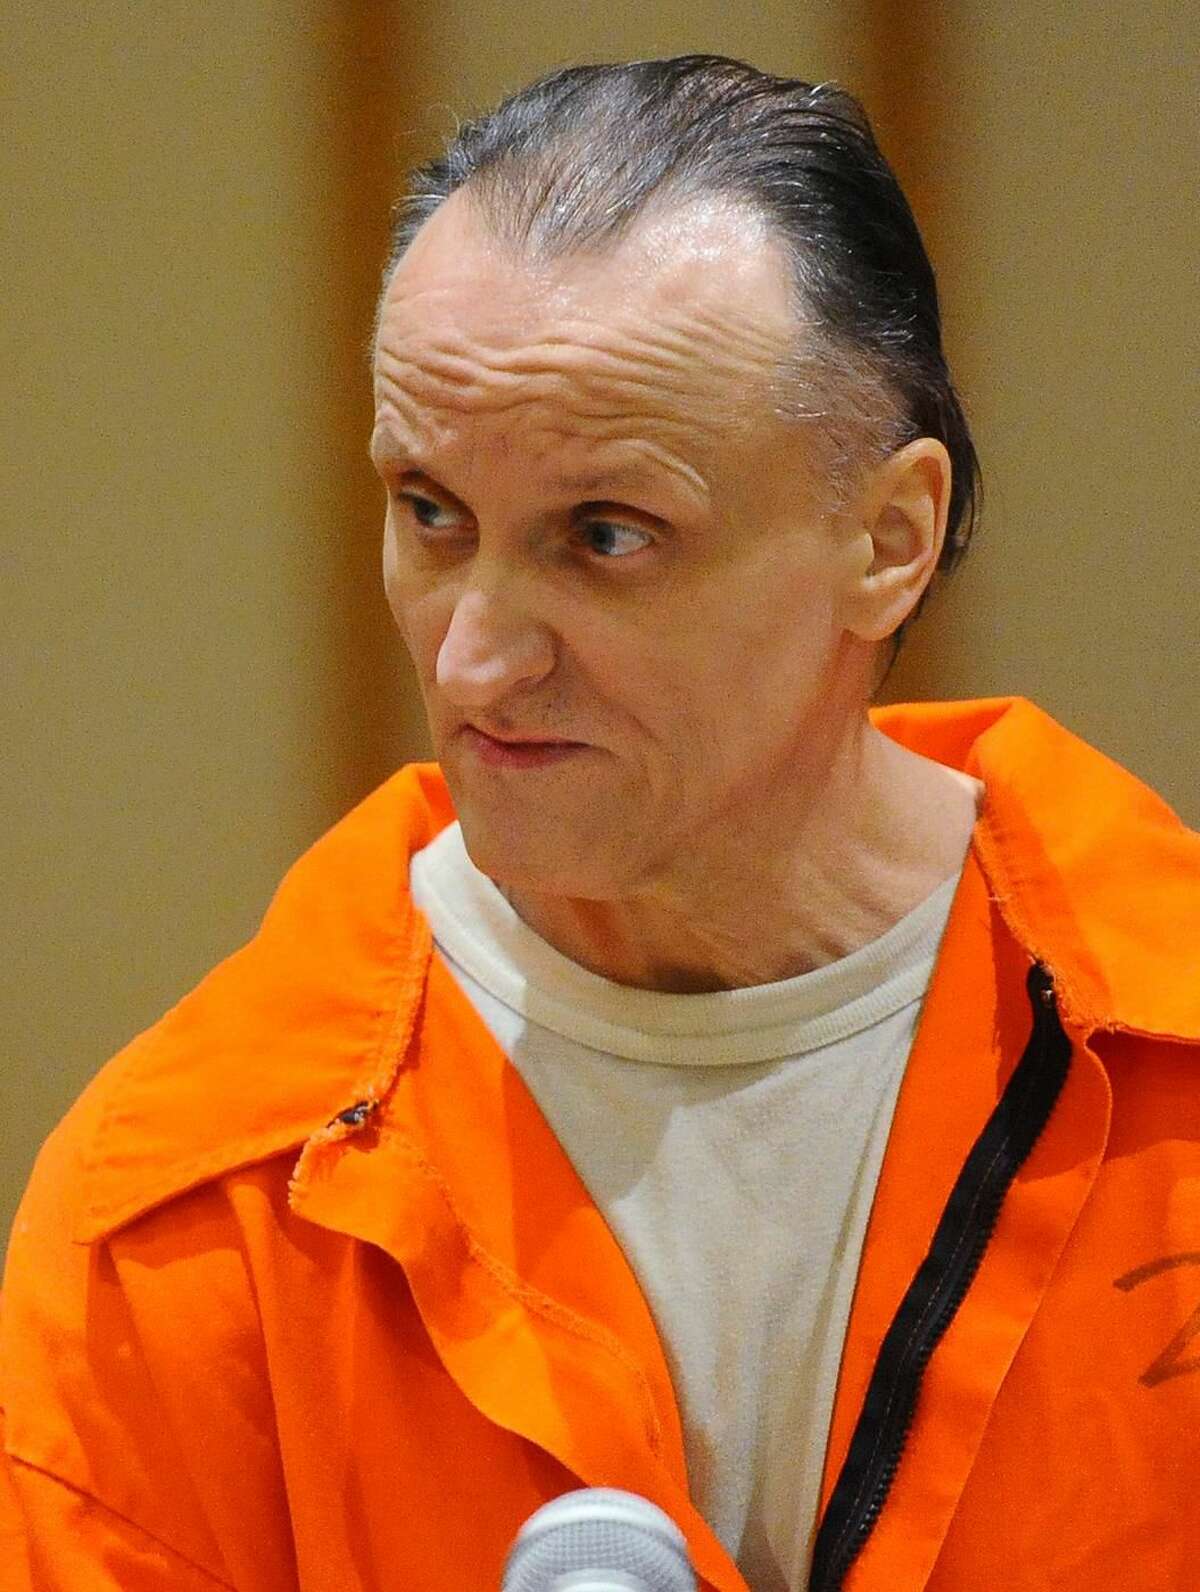 Richard Roszkowski, previously sentenced to death for the 2006 murder of three people including a 9-year-old child, was resentenced to life without the possibility of release in Superior Court in Bridgeport in 2018. A state court has ruled that Roszkowski and other former death-row inmates can sue the state for cruel and unusual punishment after he was taken off death row and sentenced to life imprisonment without parole.